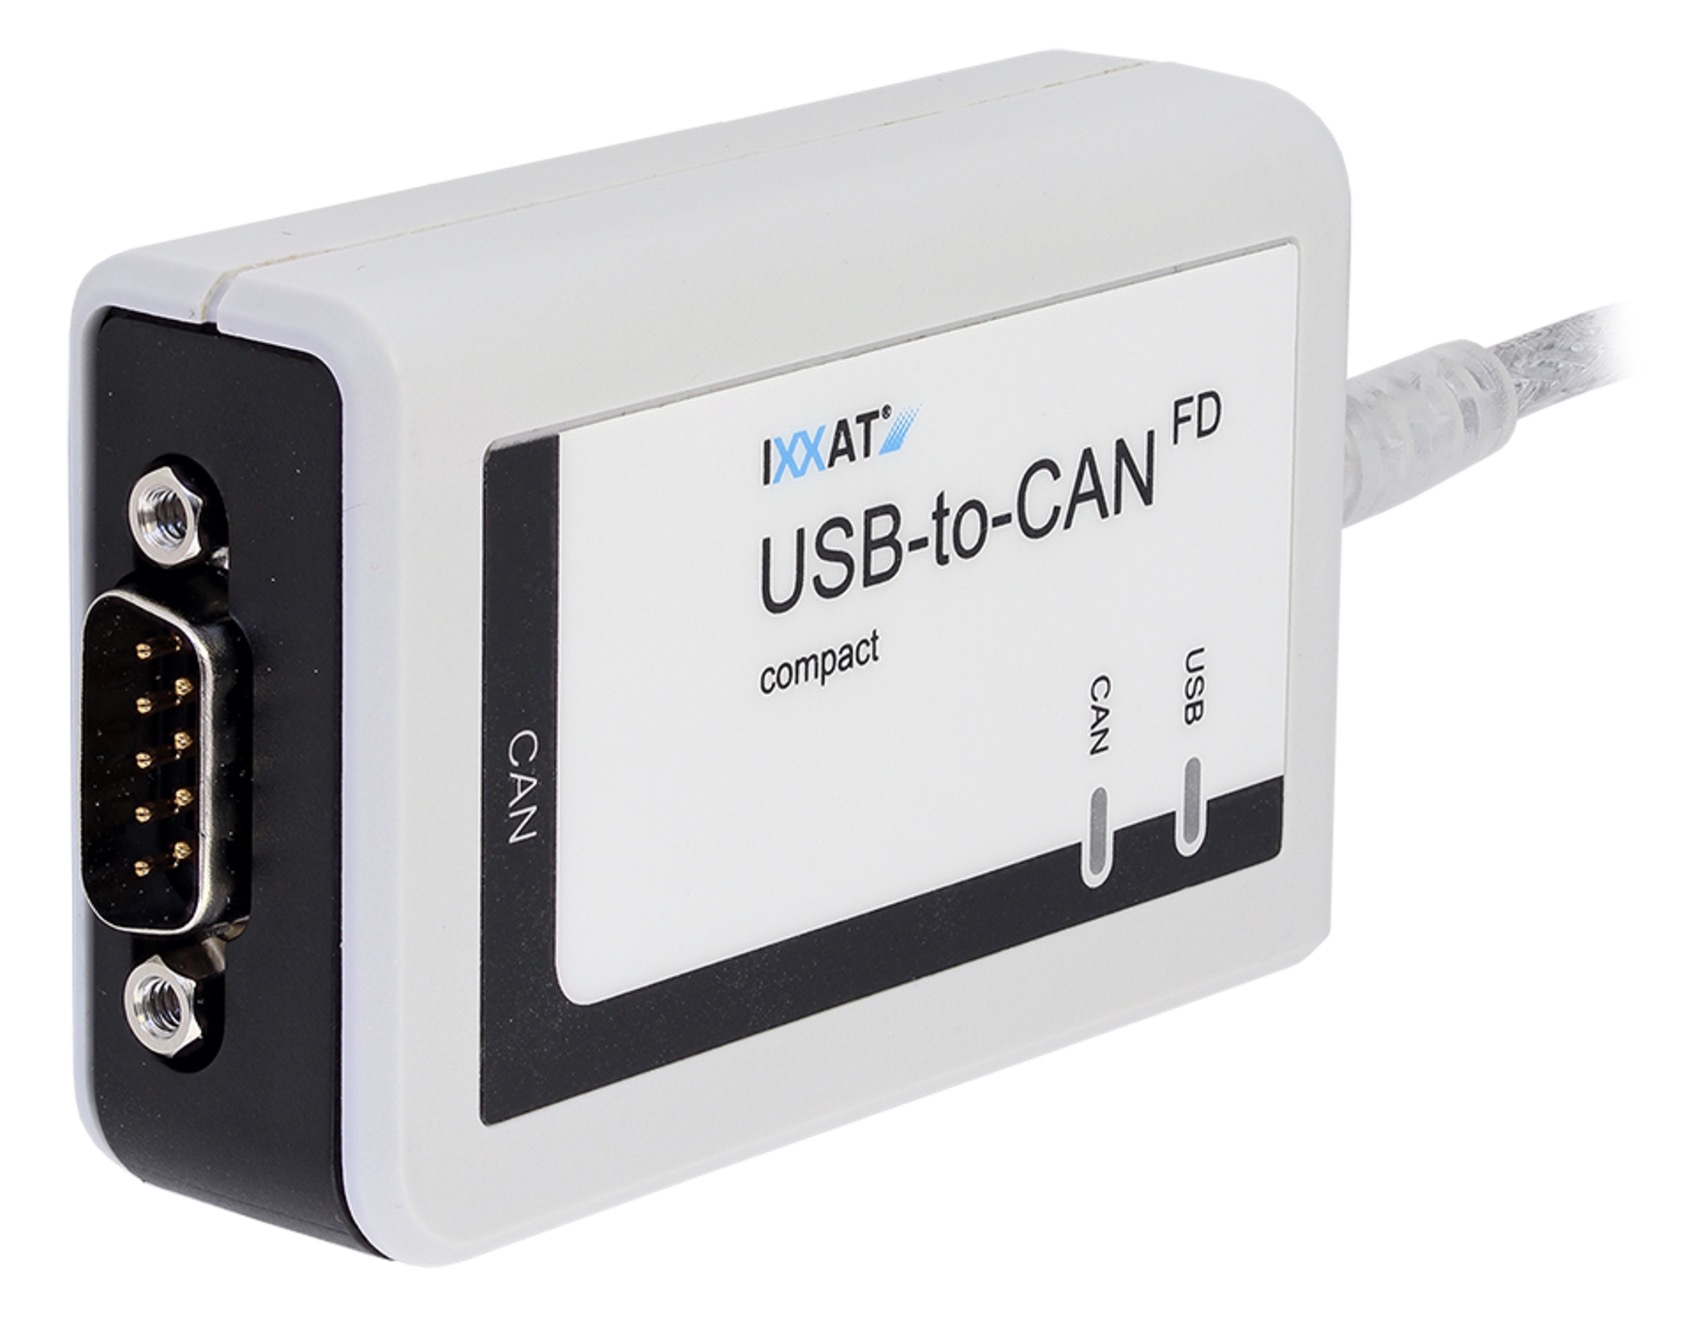 IXXAT USB-to-CAN FD Gateway